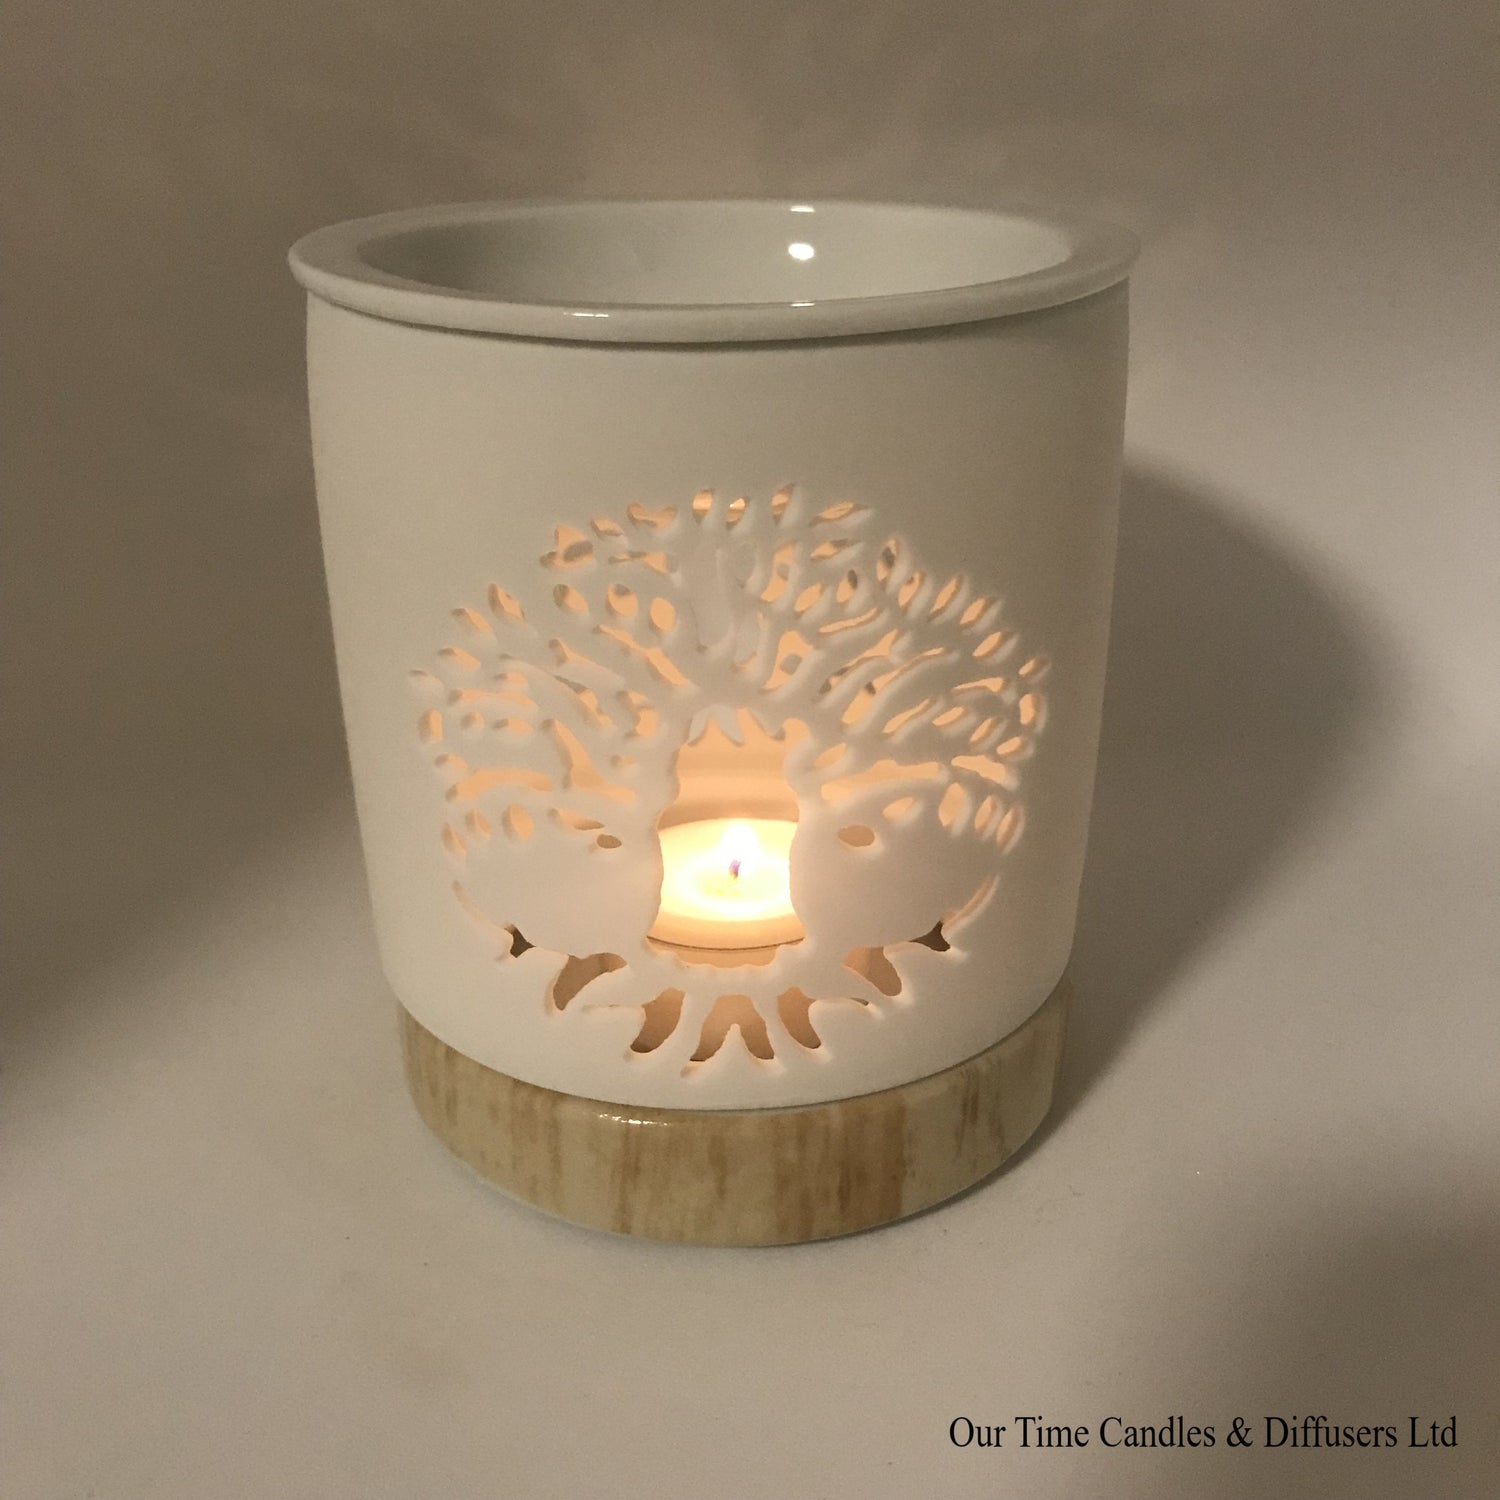 Wax Melter from Our Time Candles and Diffusers